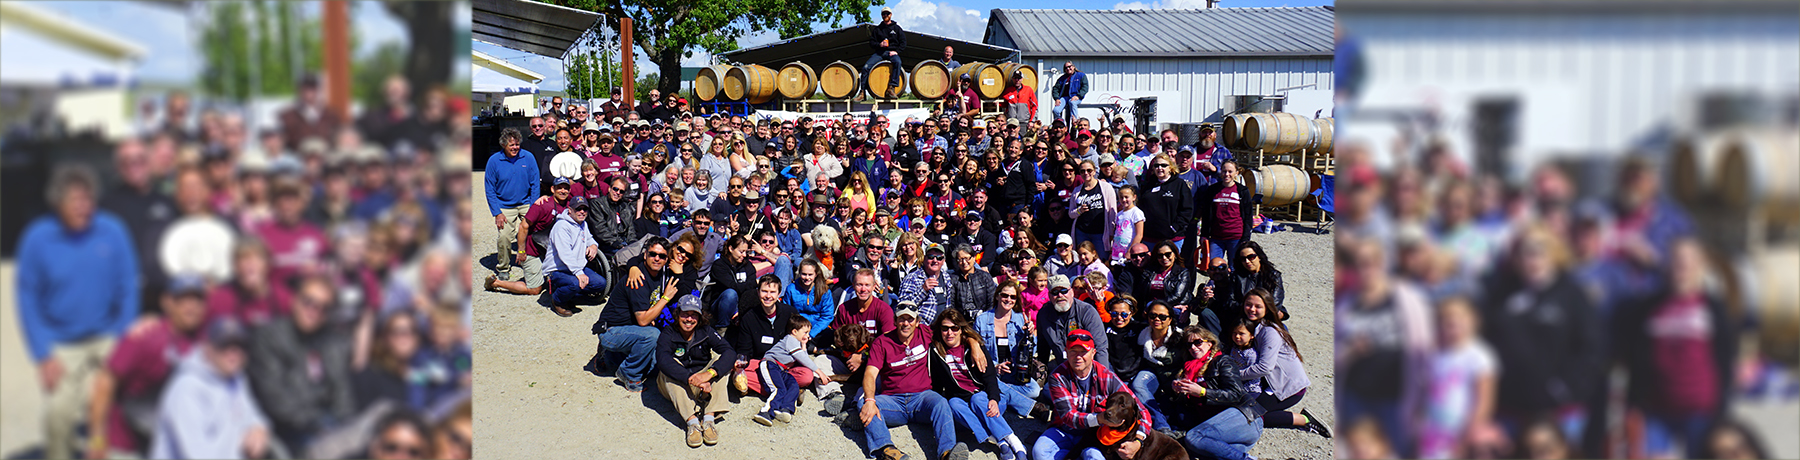 Paso Robles Spring Release Weekend (aka Zinfest)